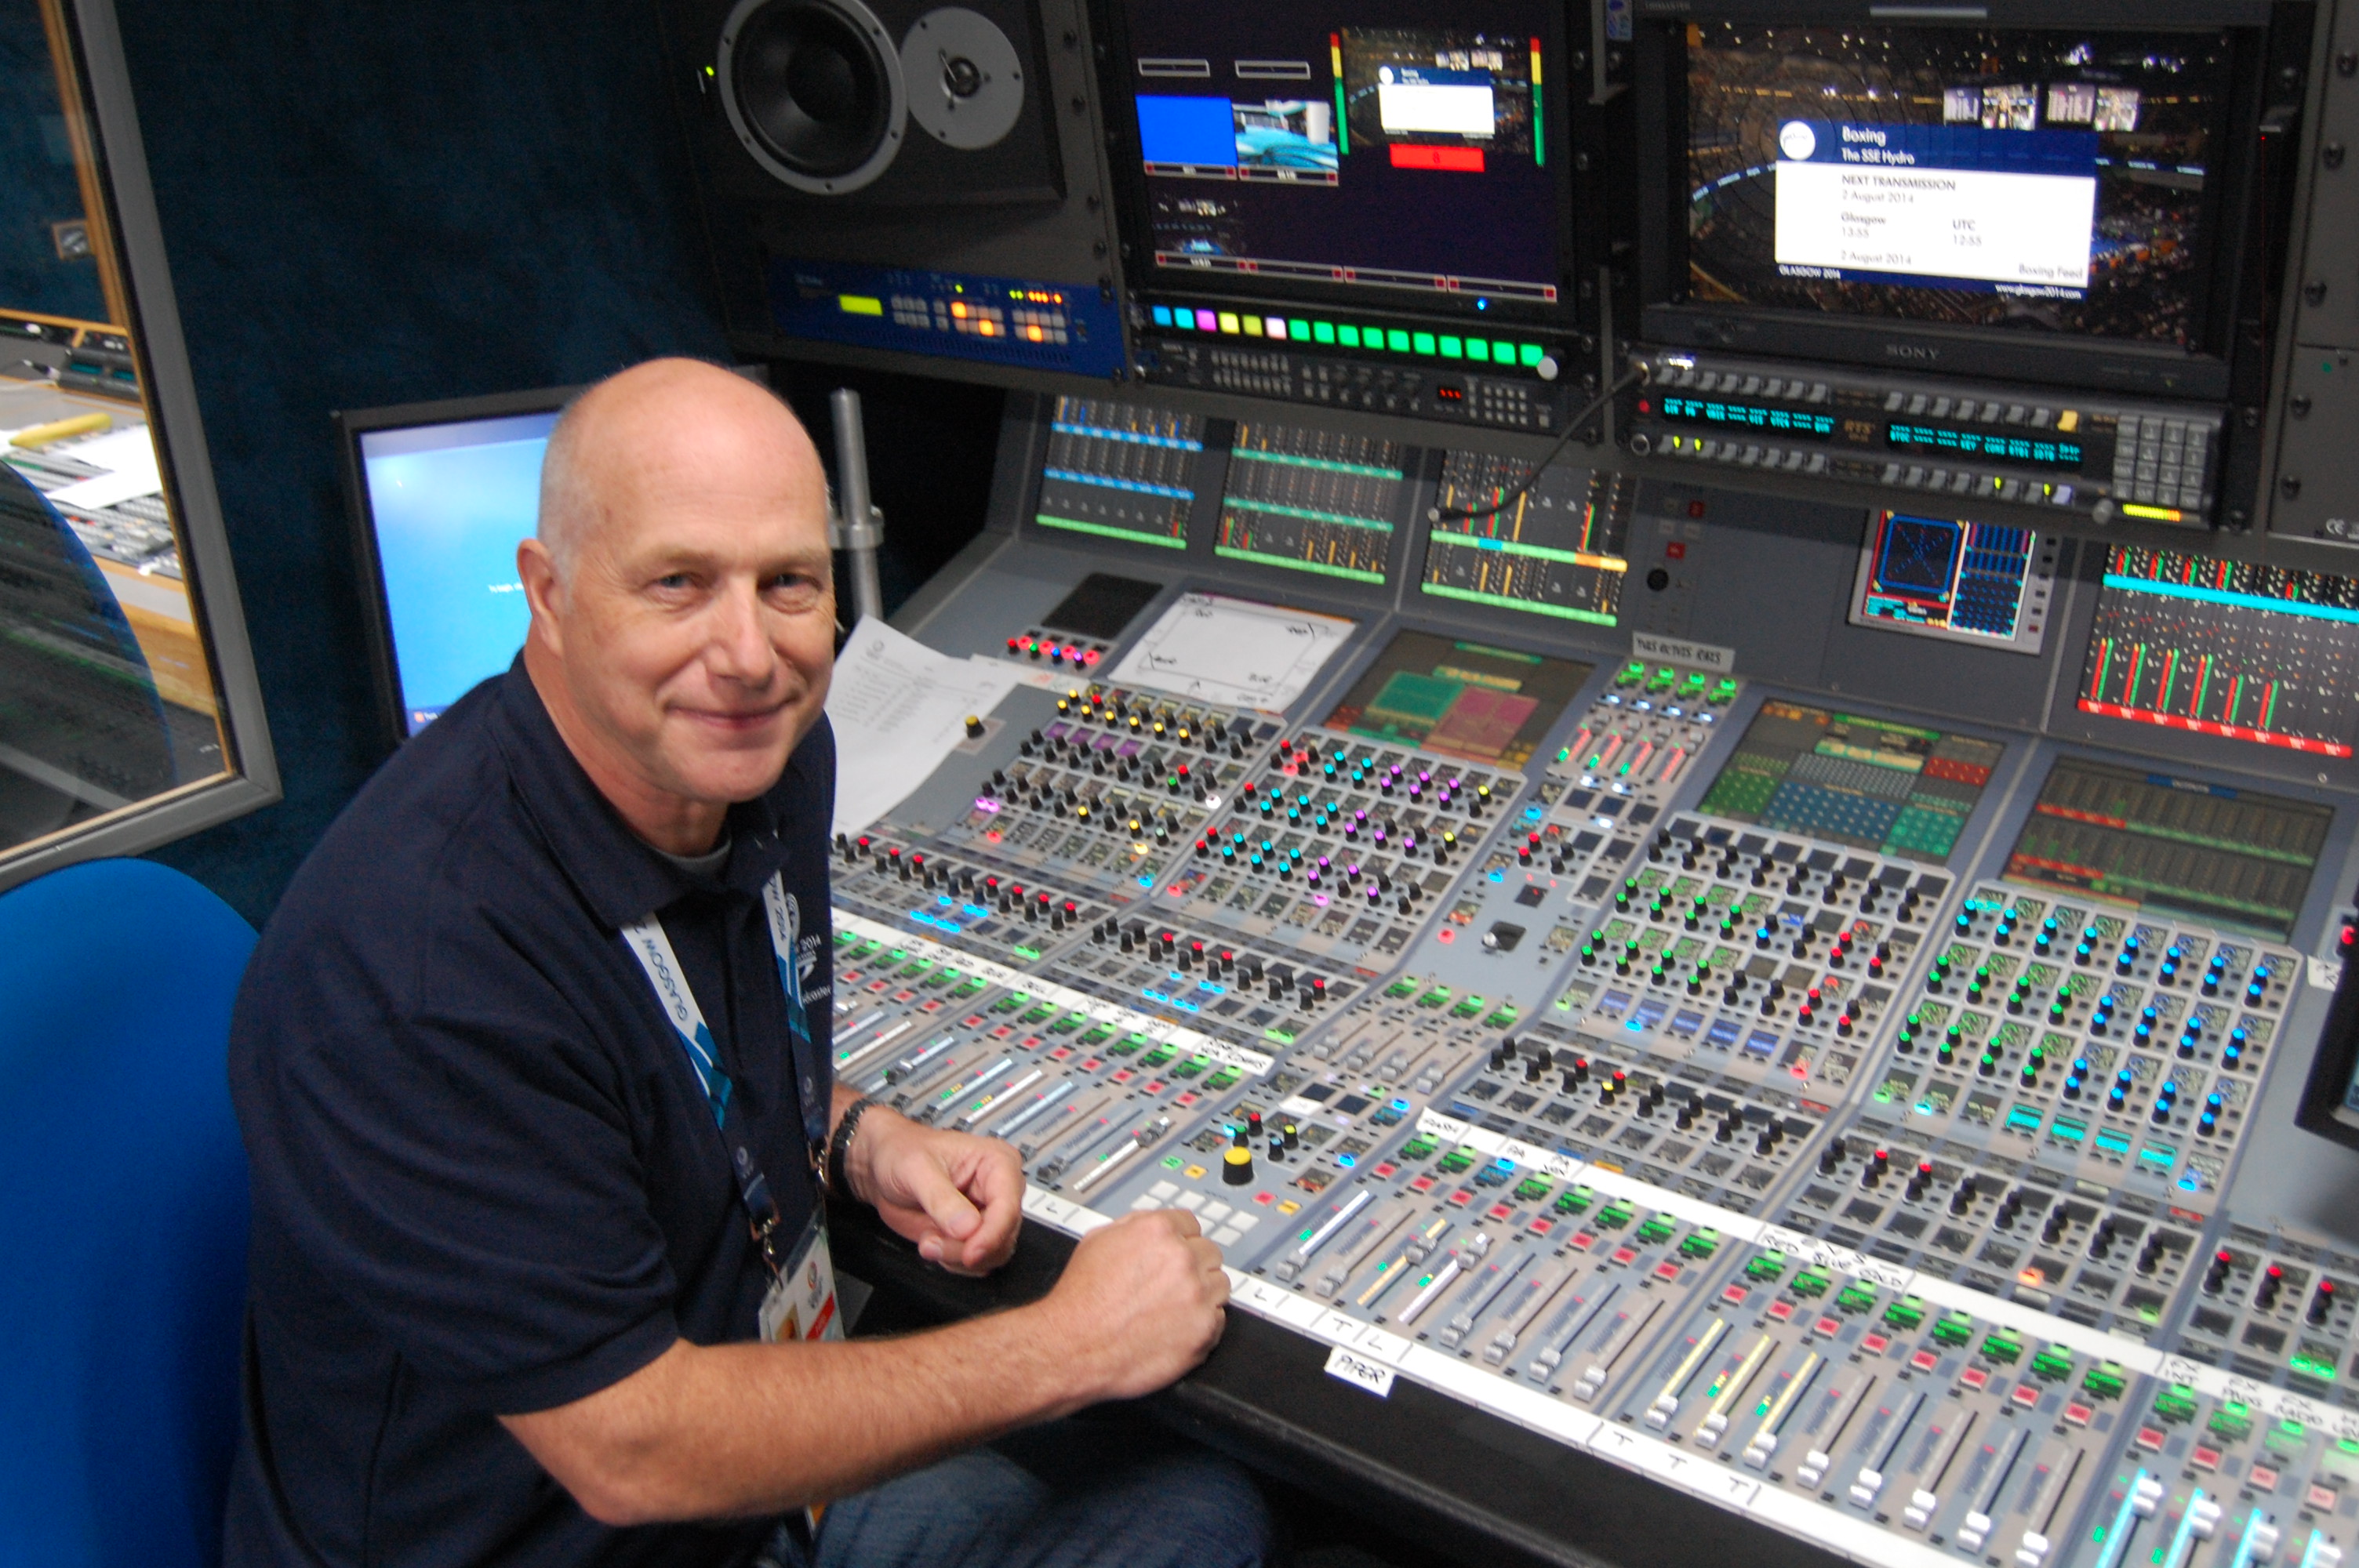 Mixing the XX Commonwealth Games boxing finals on a Calrec Apollo mixing desk at Glasgow 2014.